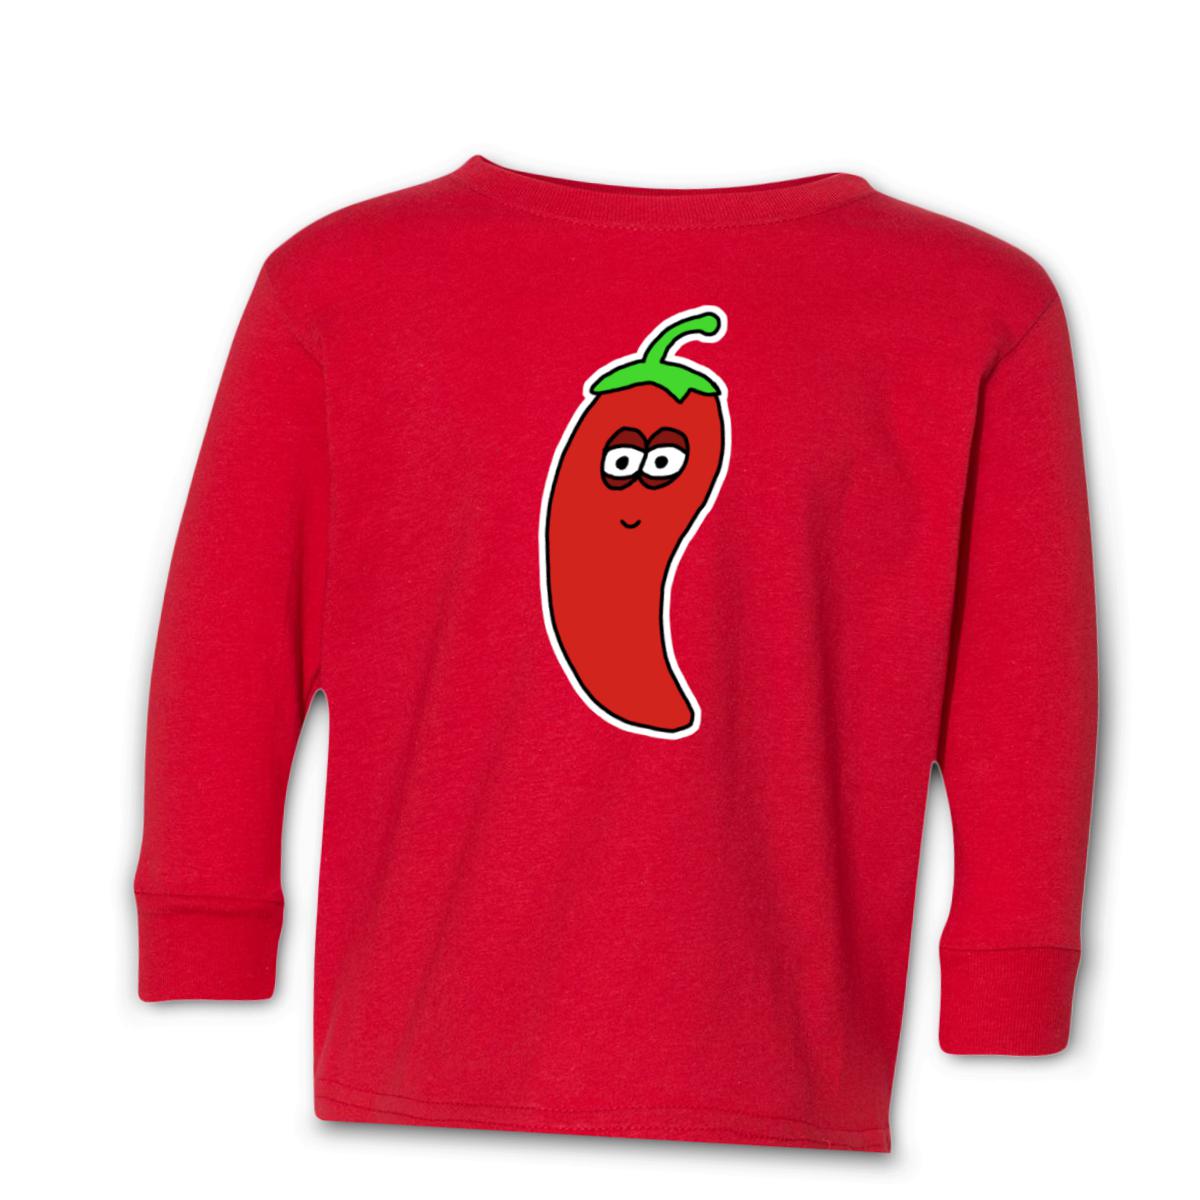 Chili Pepper Toddler Long Sleeve Tee 2T red